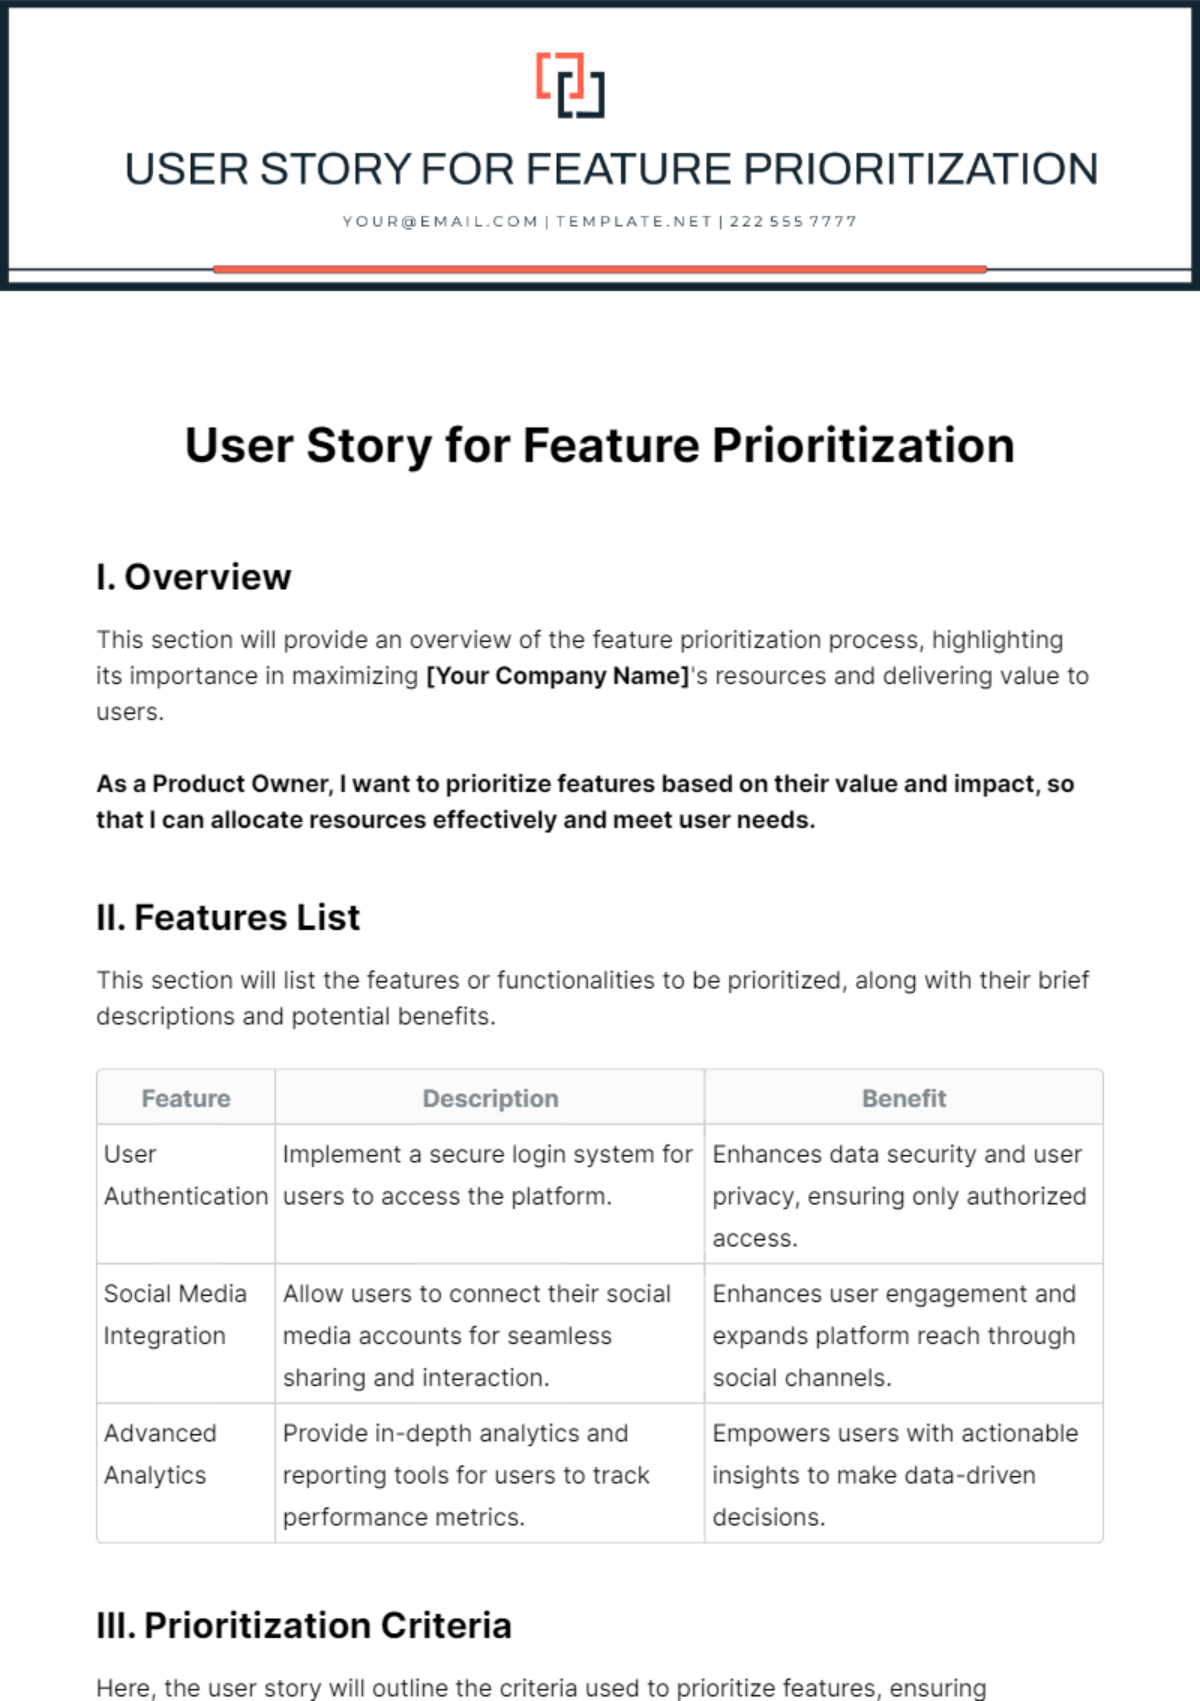 User Story For Feature Prioritization Template